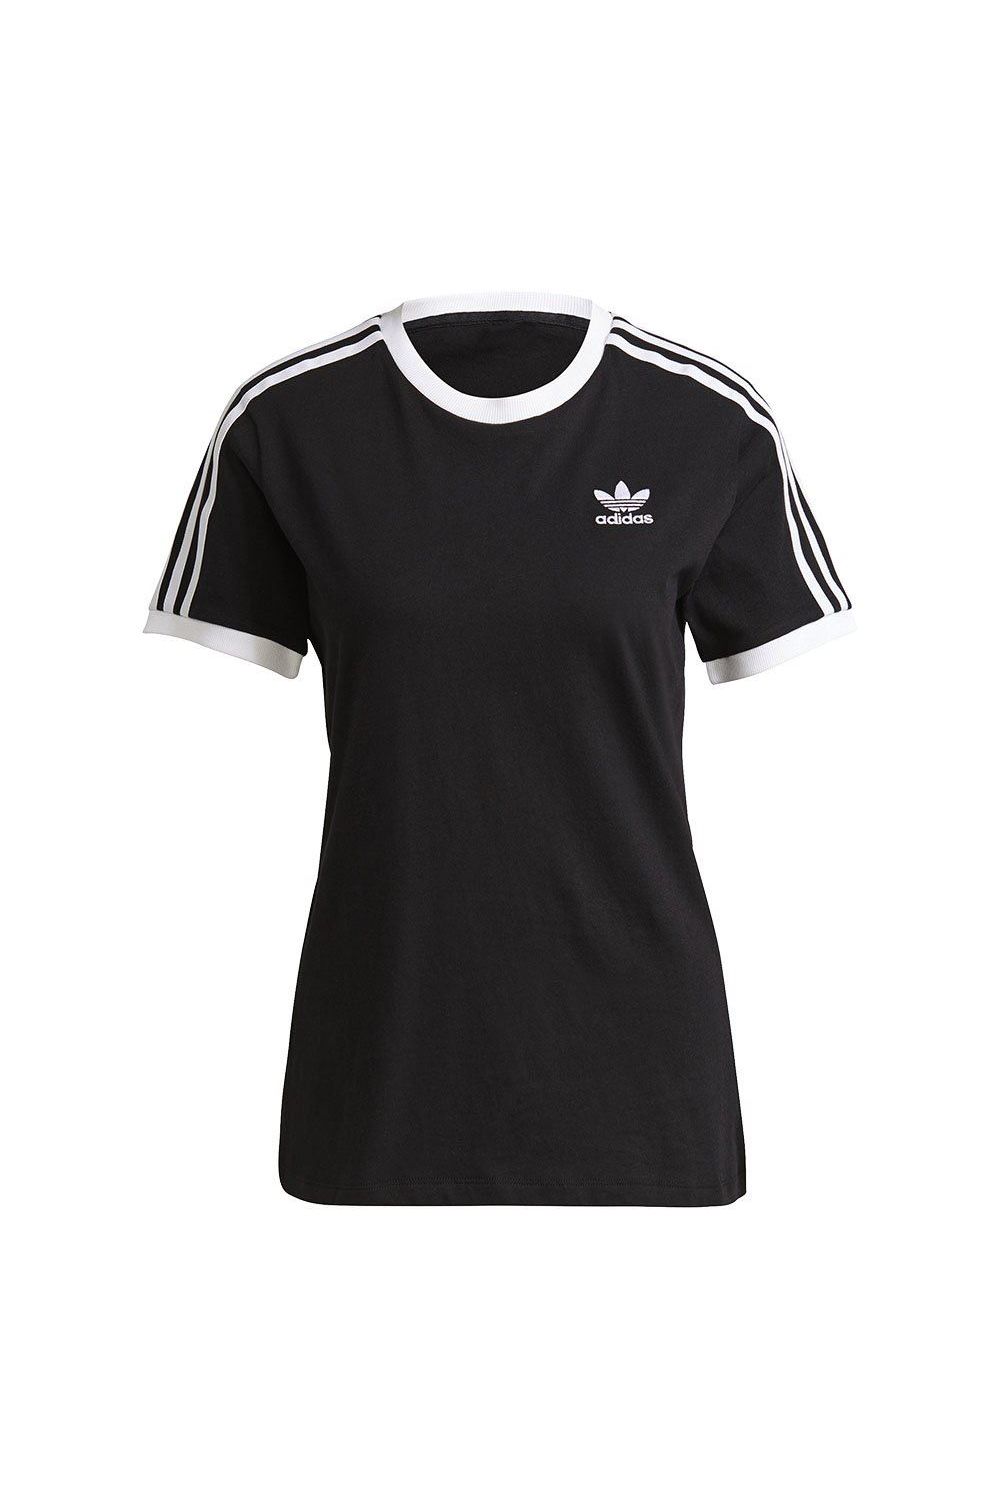 Confused There is a need to bark Tricou dama, Adidas 3 Stripes TEE GN2900, Bumbac, 34 EU, Negru - eMAG.ro